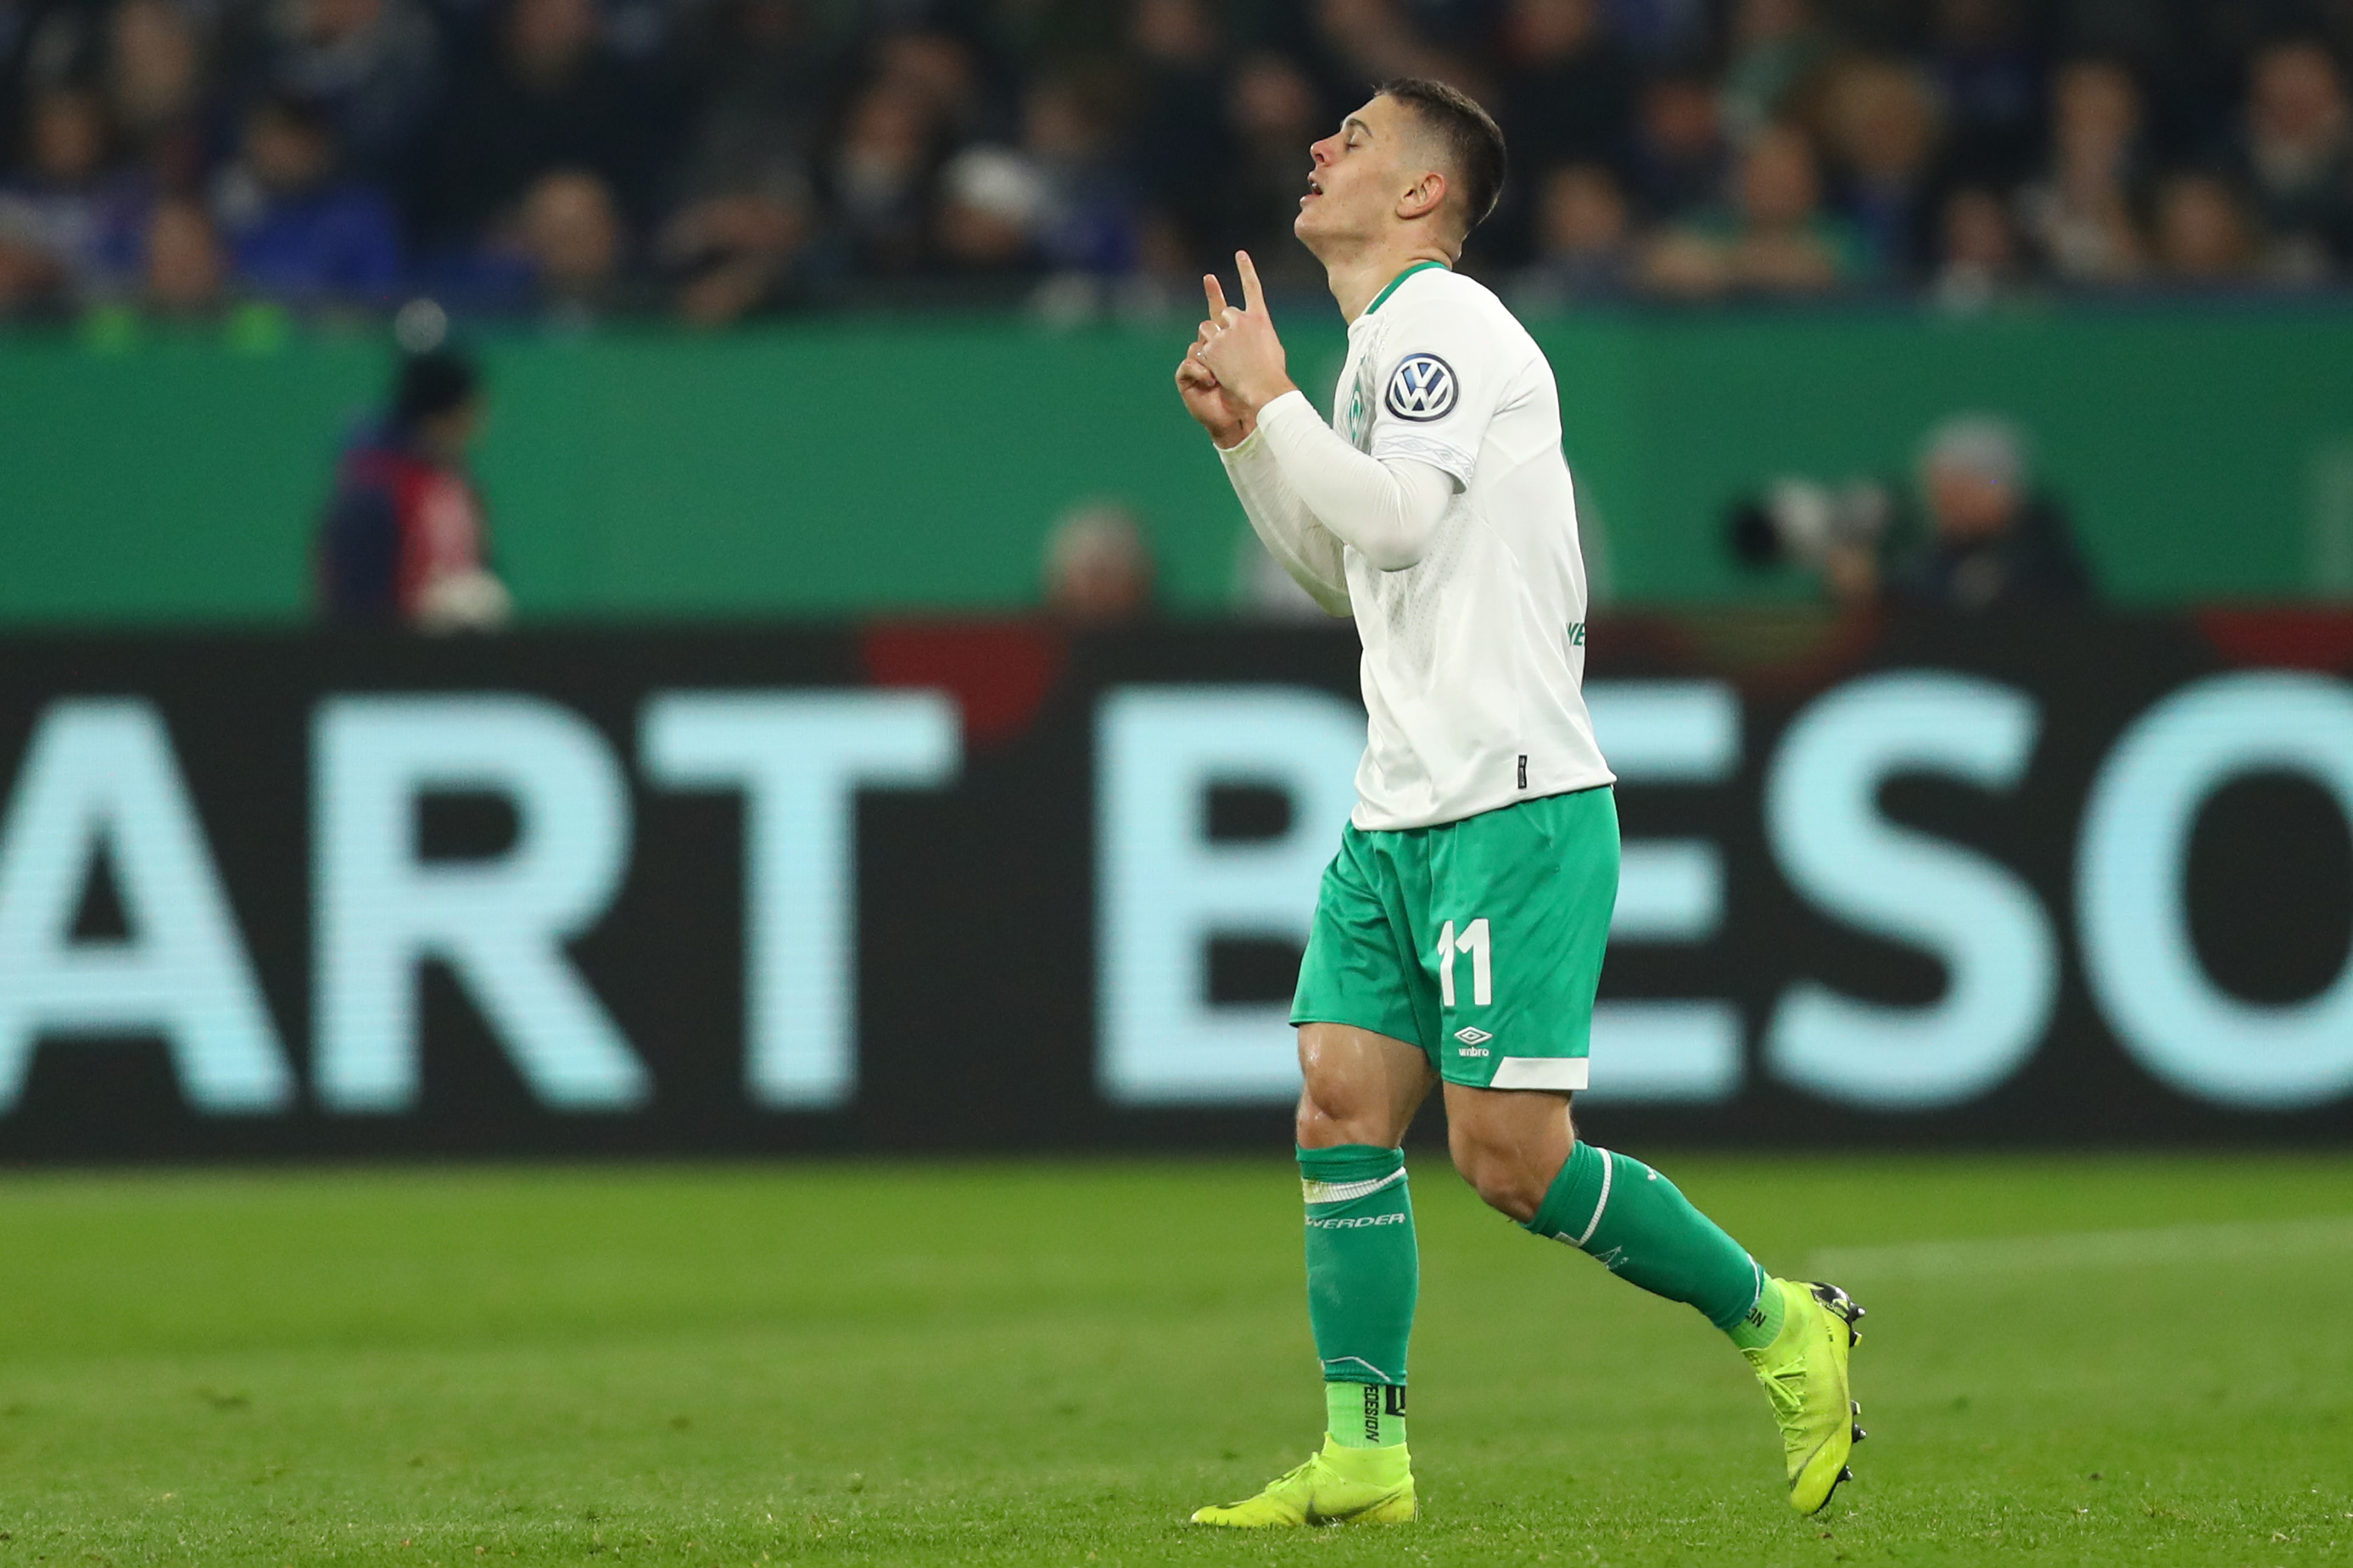 All eyes will be on Milot Rashica, as far as Werder Bremen are concerned. (Photo by Dean Mouhtaropoulos/Bongarts/Getty Images)